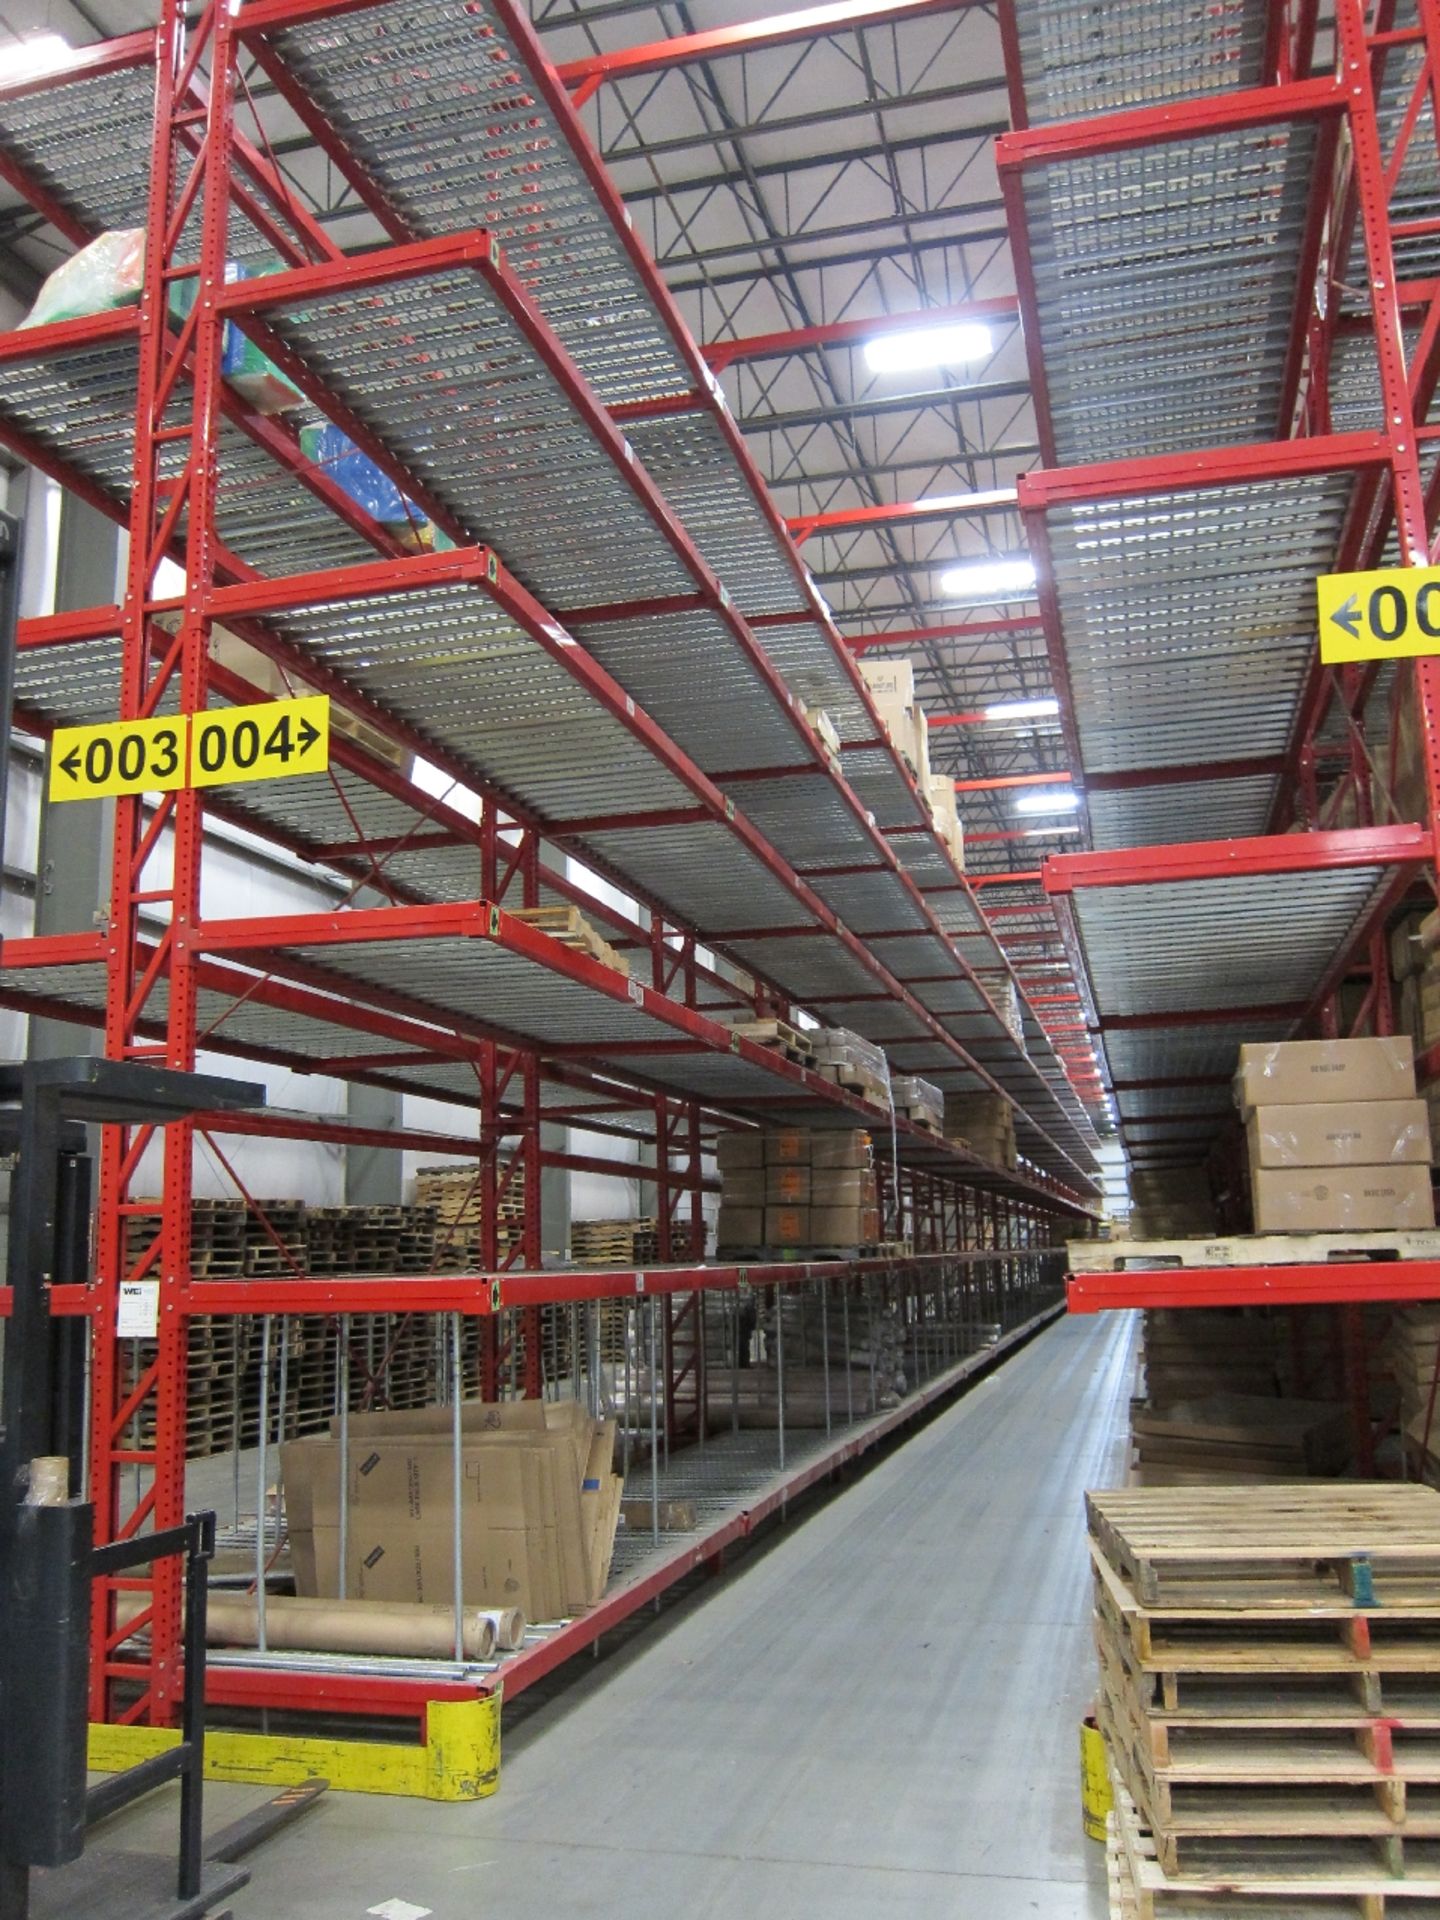 (X75) SECTIONS/BAYS OF KINGWAY TEARDROP STYLE CANTILEVER RACKING, 14" X 384" UPRIGHTS, 48" ARMS - Image 2 of 17